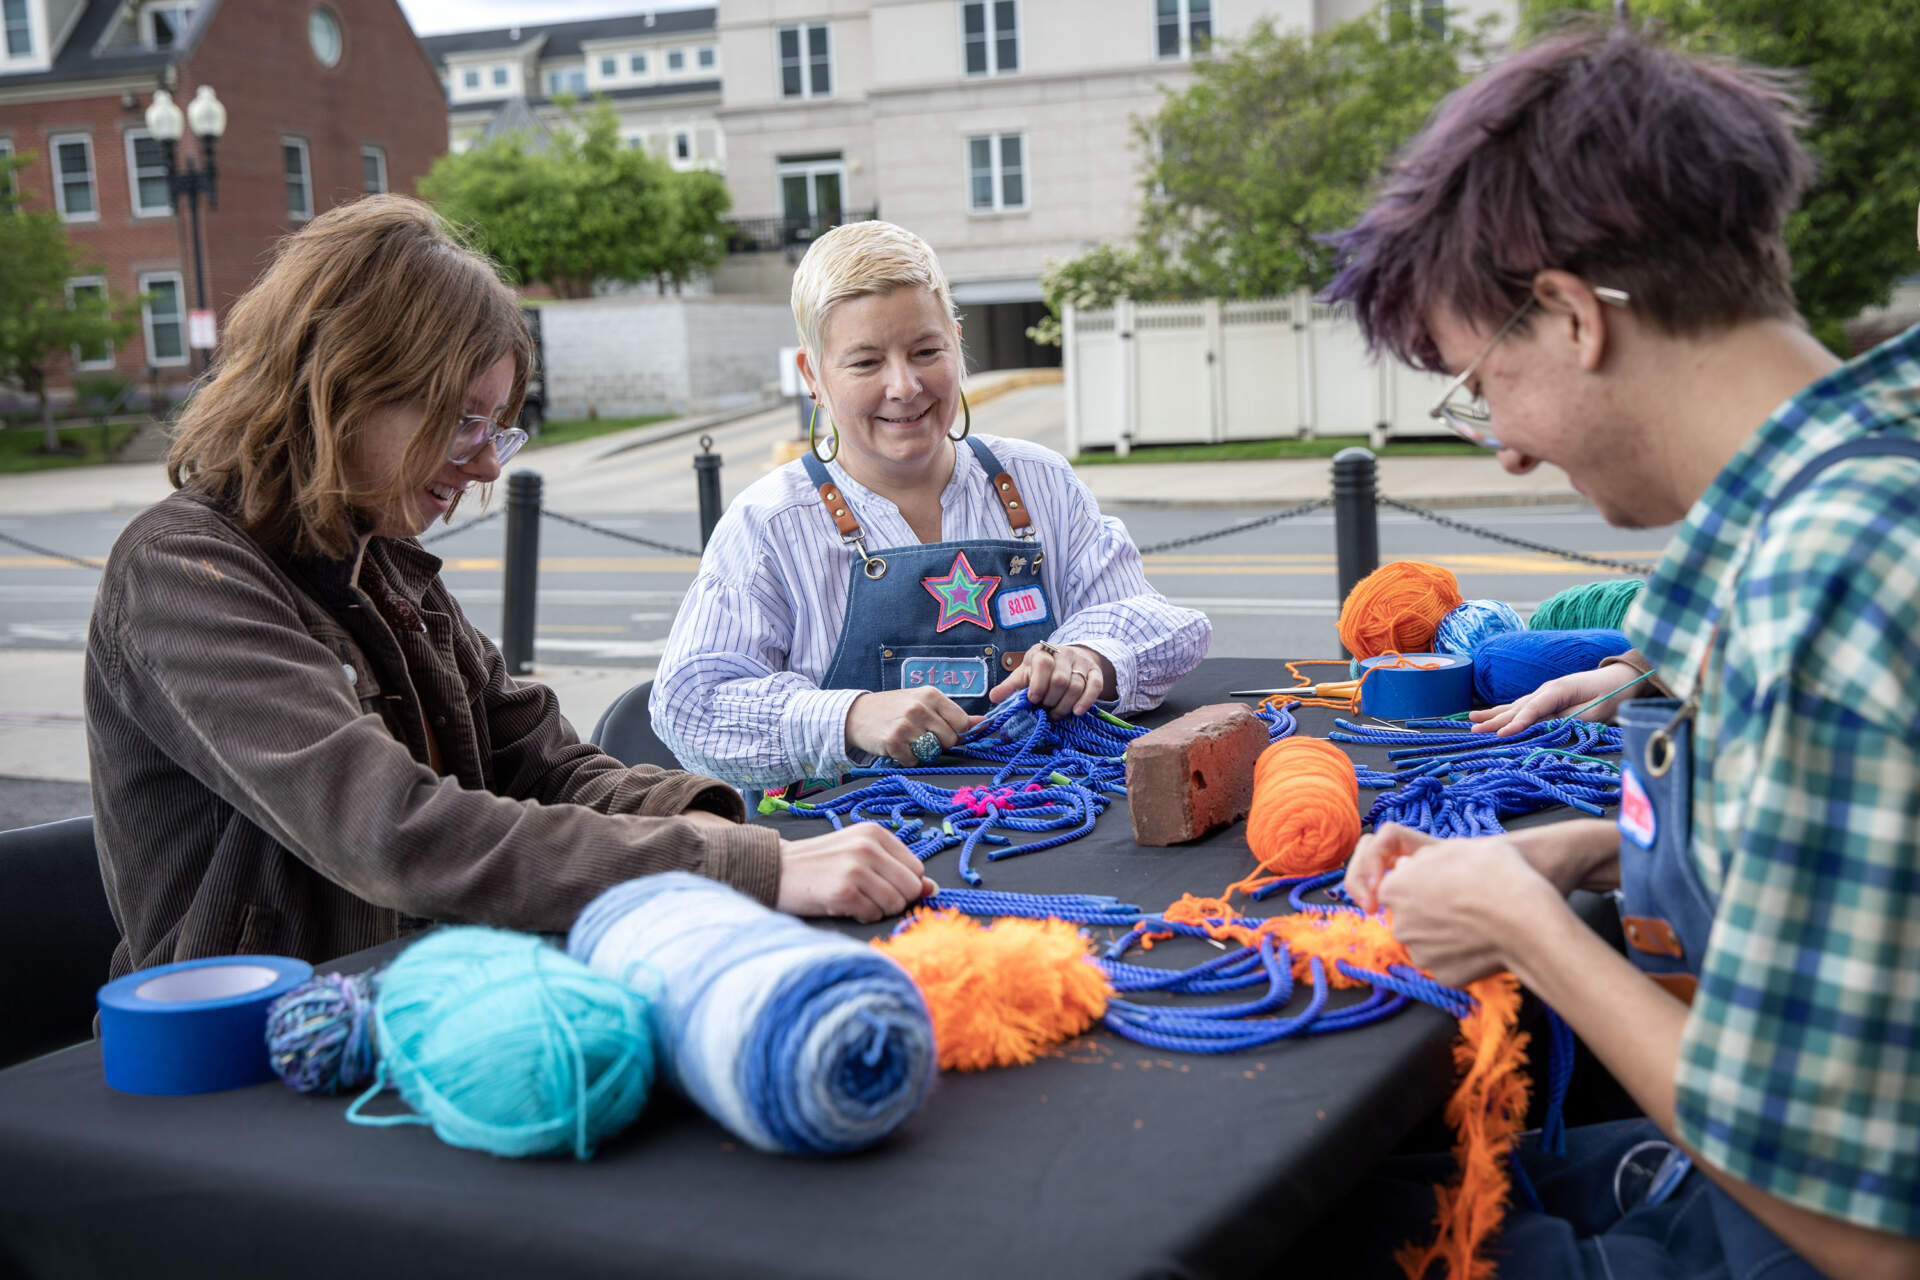 Artist Samantha Fields demonstrates the process of splicing nautical rope at Lot Lab near the Charlestown Navy Yard. (Robin Lubbock/WBUR)